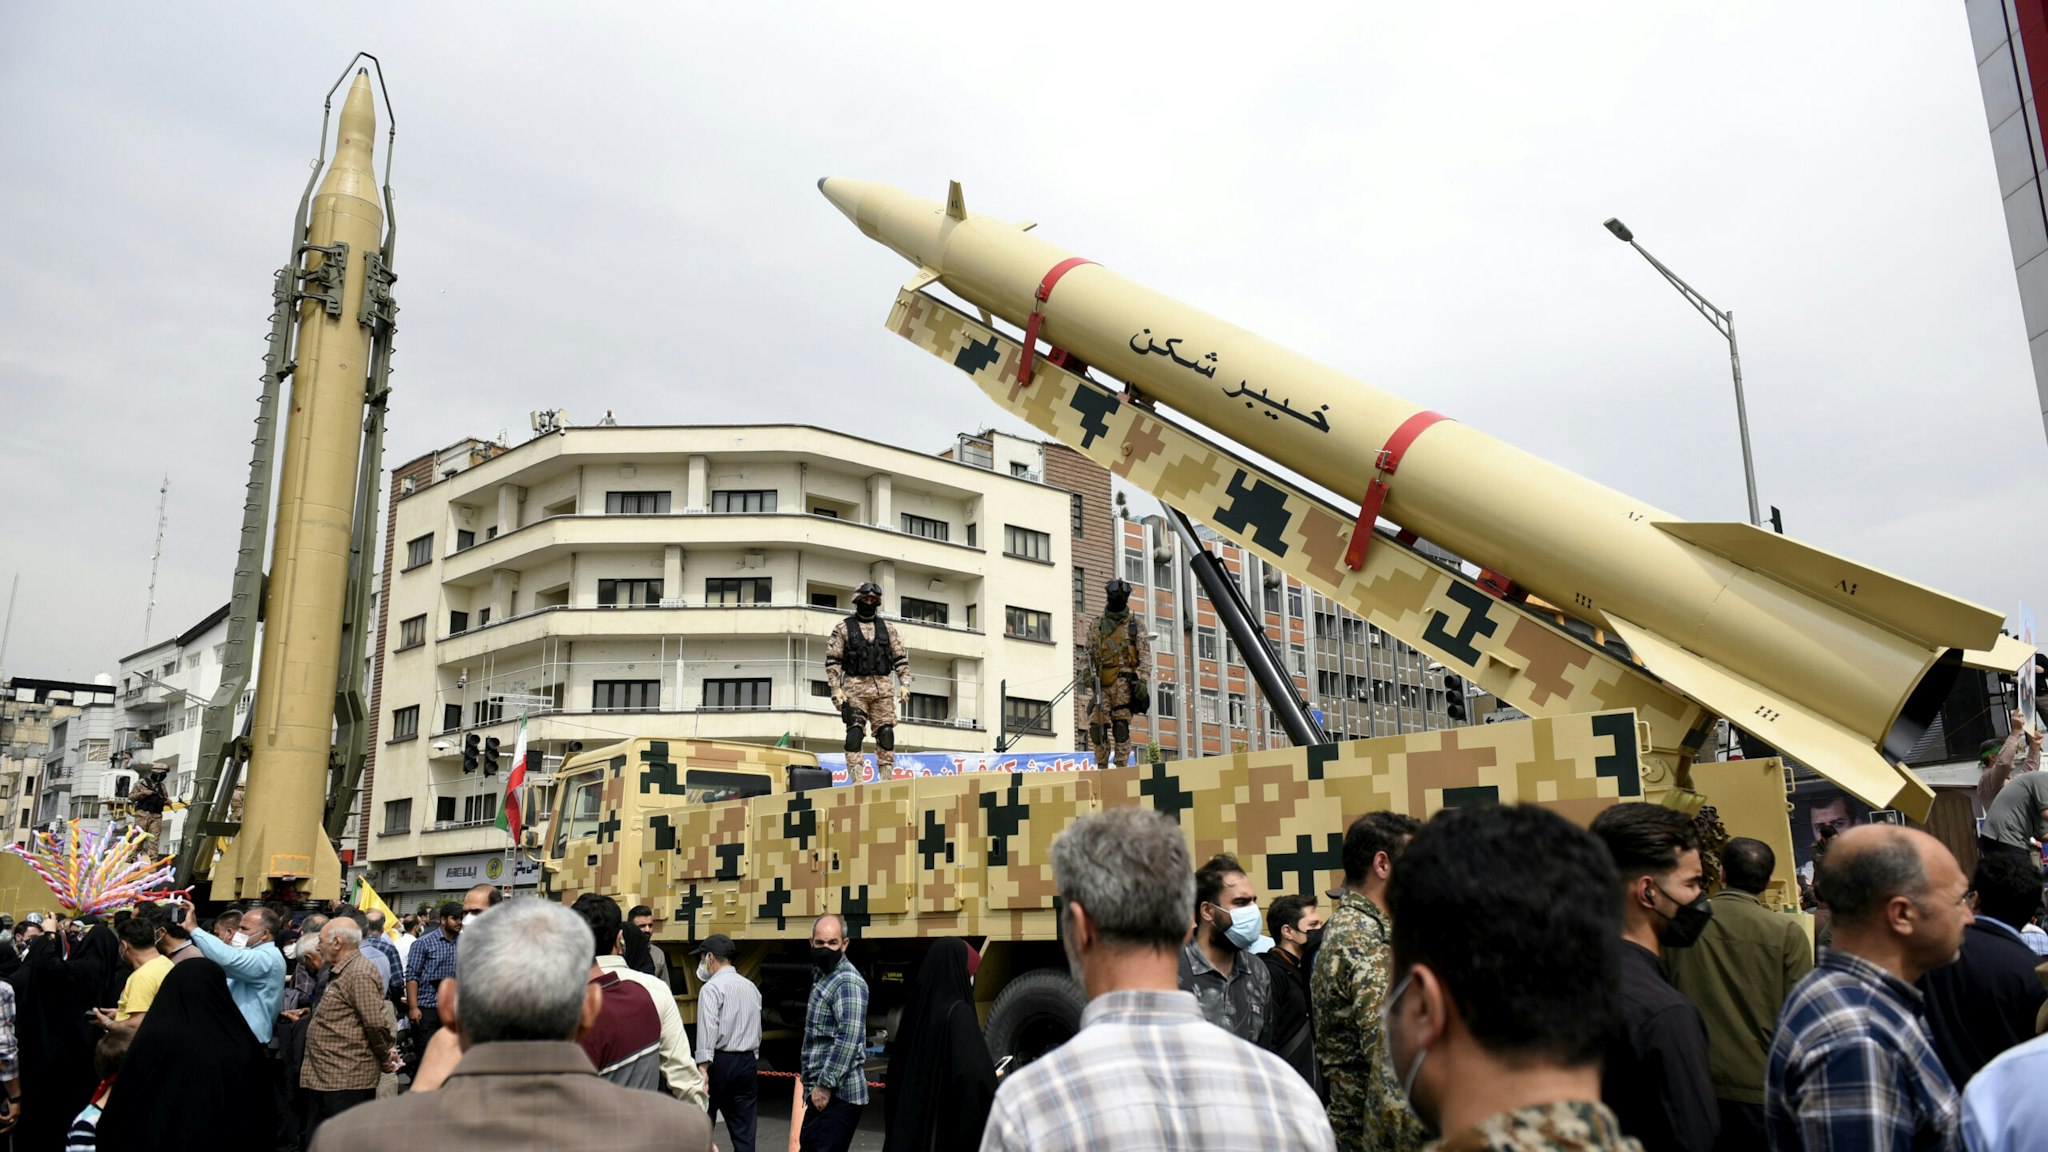 TEHRAN, IRAN - 2022/04/29: "Shahab-3", left, and "Khaibar-buster" missiles displayed during the annual pro-Palestinians Al-Quds or Jerusalem Day rally in Tehran. "Khaibar-buster" is the world's longest-range tactical ballistic missile with a range of 1,450 km. The 'Kheiber-Shekan' strategic missile is one of the long-range missiles of the Islamic Revolutionary Guard Corps (IRGC).